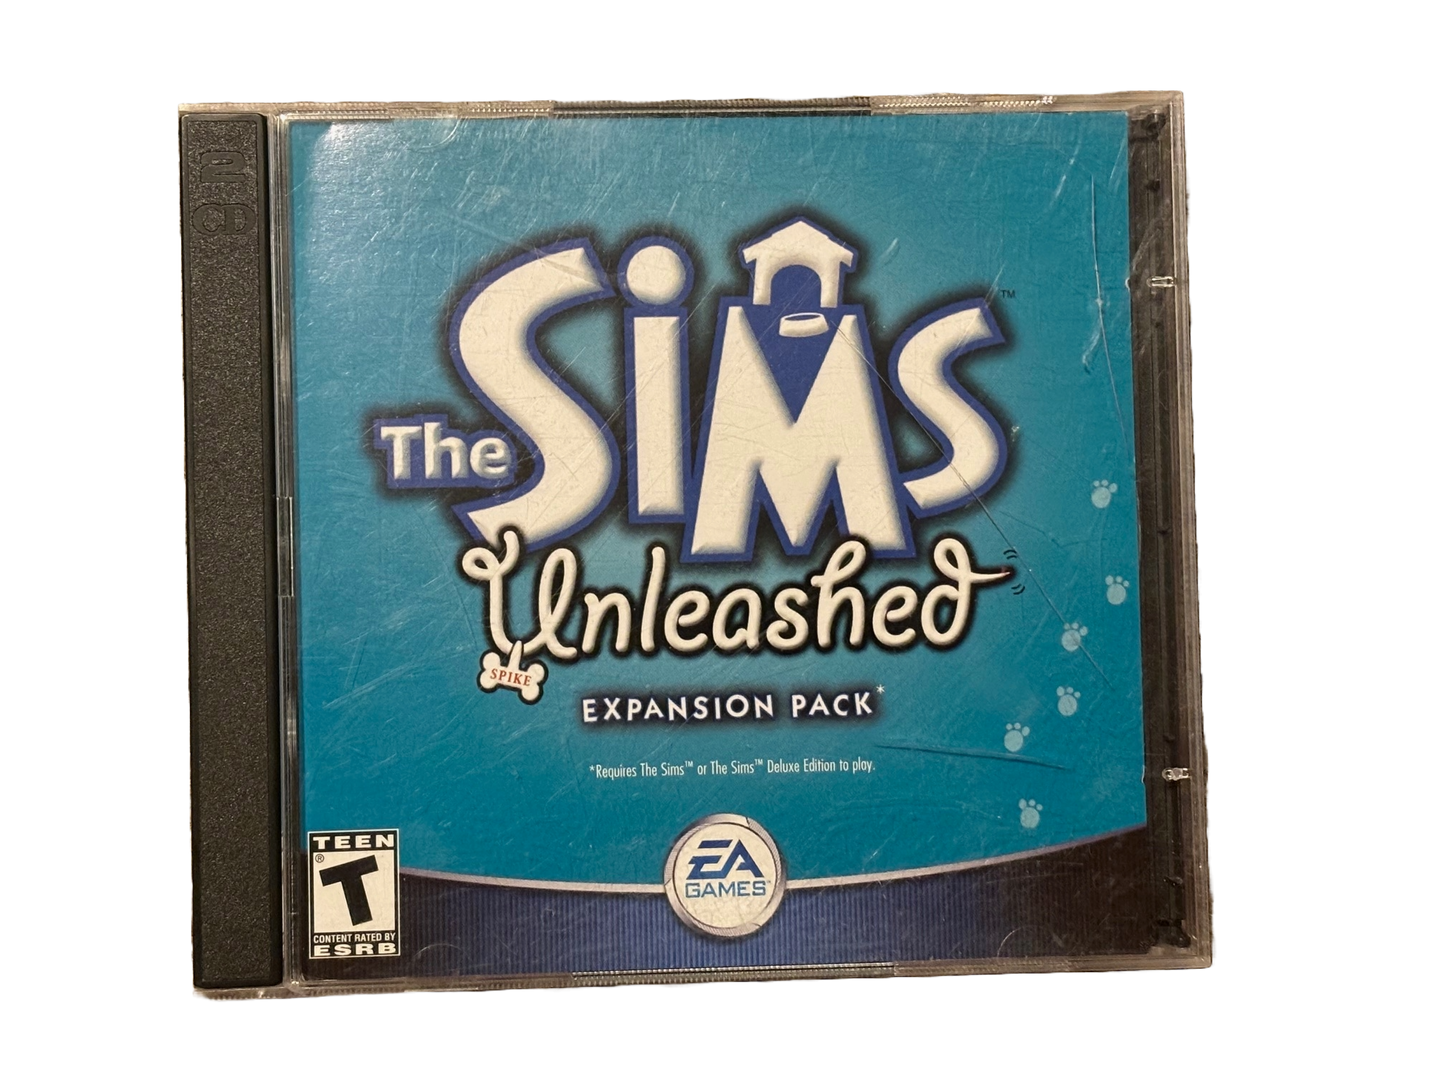 The Sims Unleashed Vintage PC CD-ROM Game (2002)